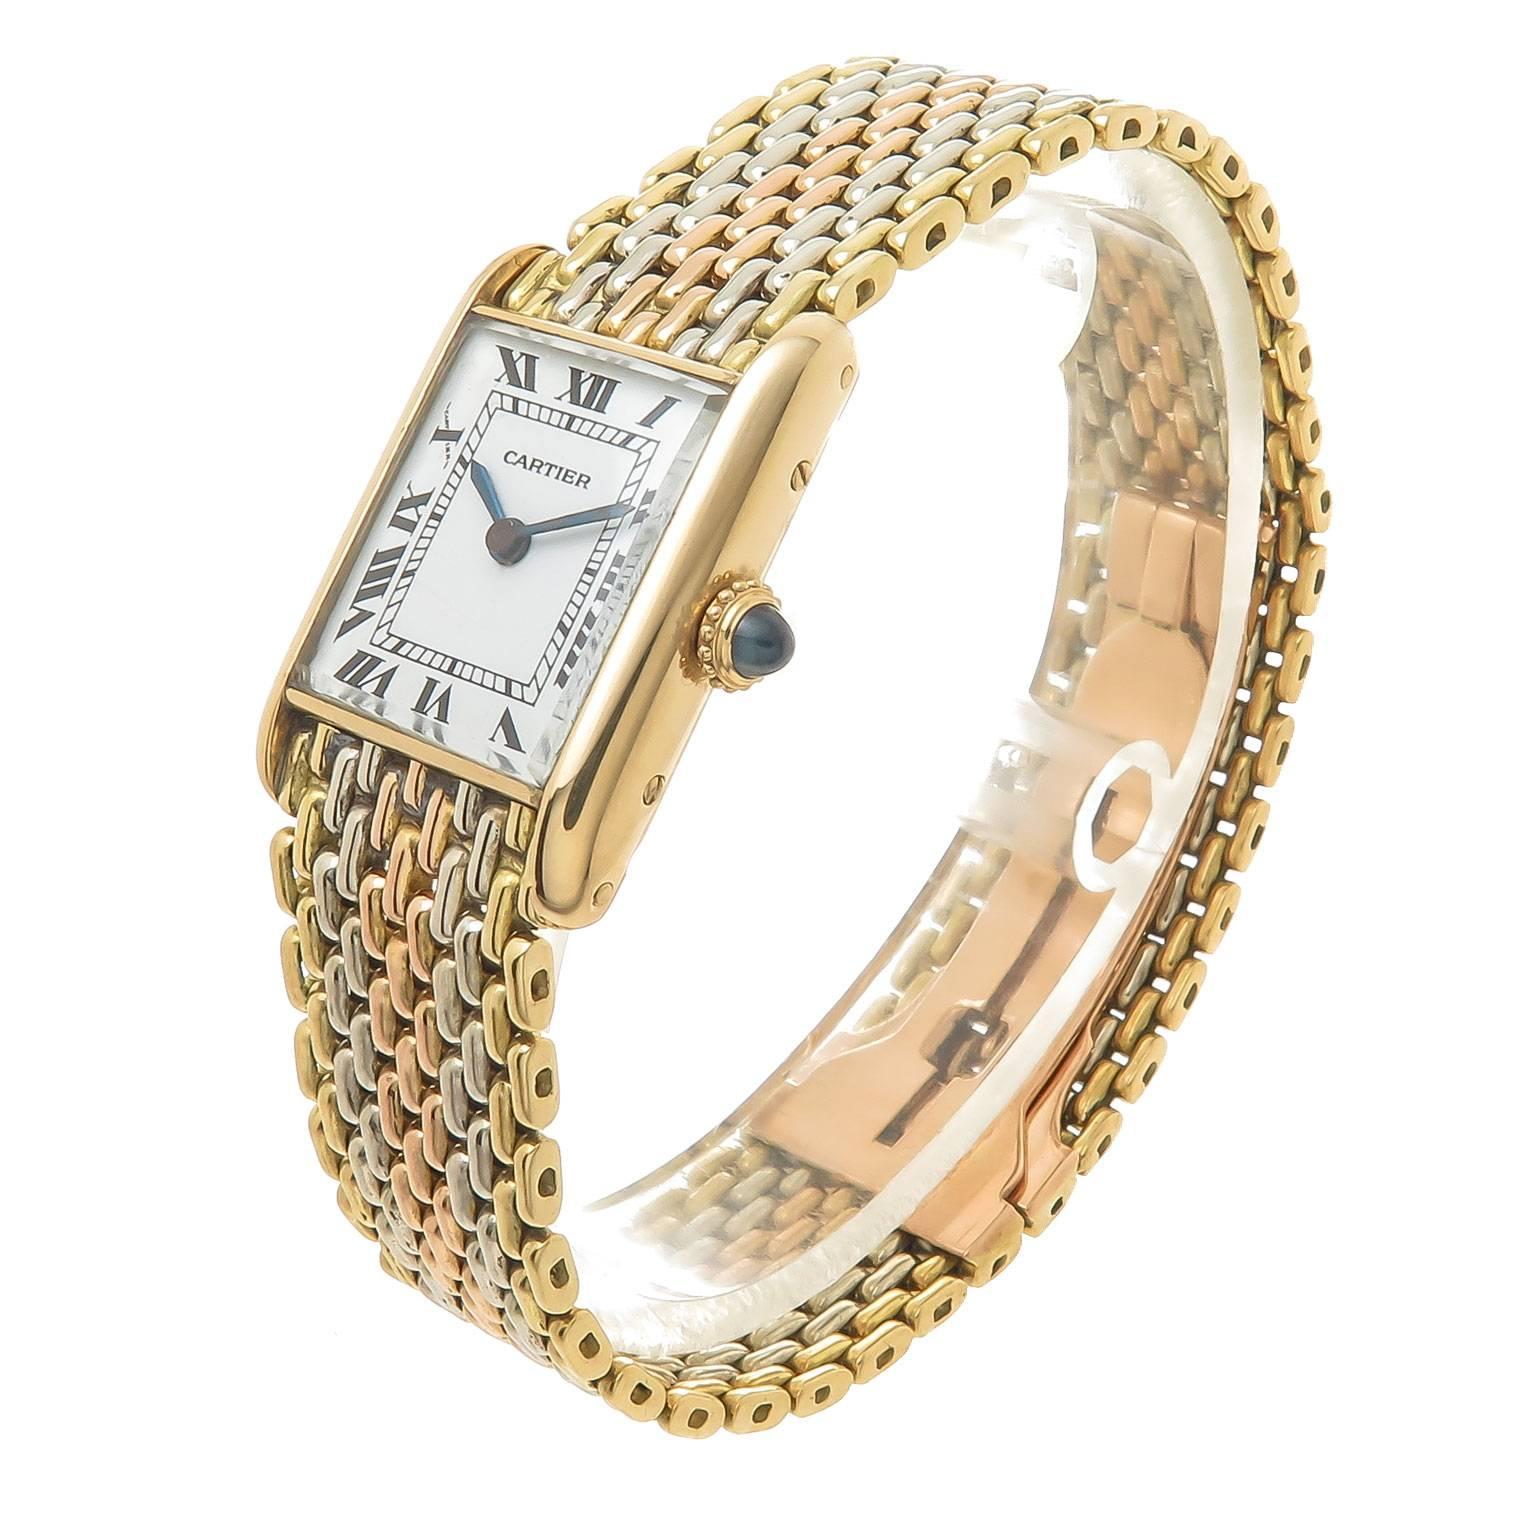 Circa 1980 Cartier Ladies Tank Watch on a Tri Color Gold Cartier bracelet. 25 X 23 MM 18K Yellow Gold Case, Mechanical, manual wind movement, White Enamel Dial with Black Roman Numerals, Sapphire Crown. 5/8 inch wide White, Yellow and Rose Gold Link